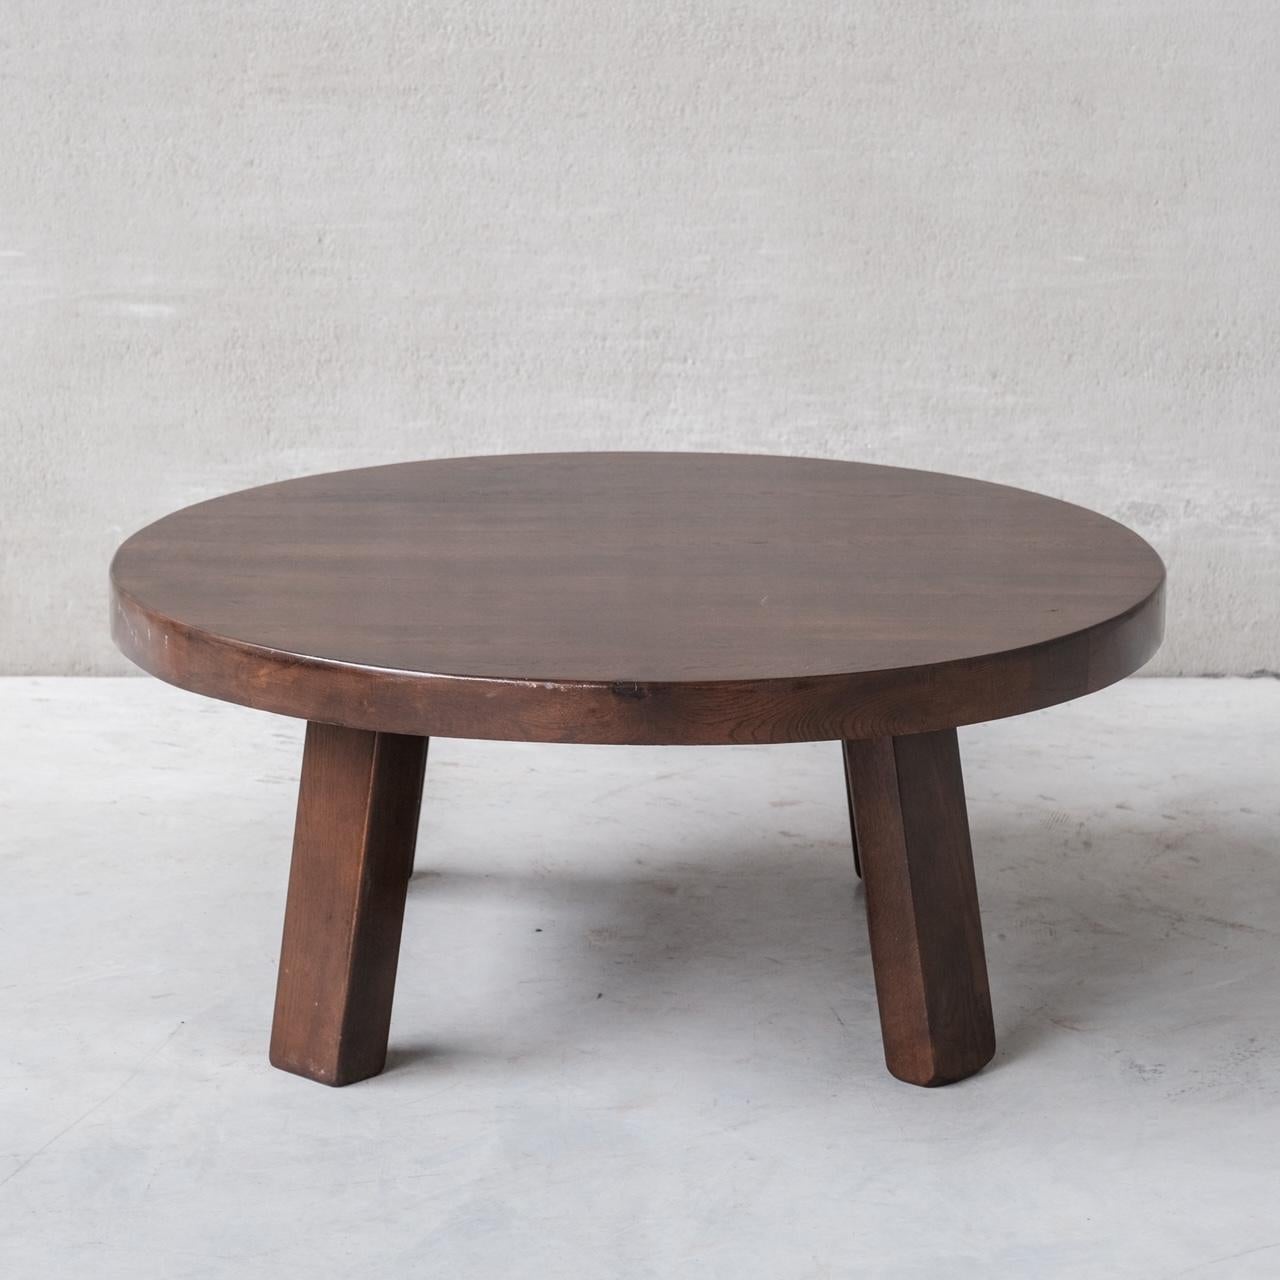 A circular brutalist coffee table. 

Belgium, c1970s. 

Simple clean lines, circular top over four legs. 

Good condition, some scuffs and wear commensurate with age. 

Location: Belgium Gallery.

Dimensions: 46 H x 110 Diameter in cm.